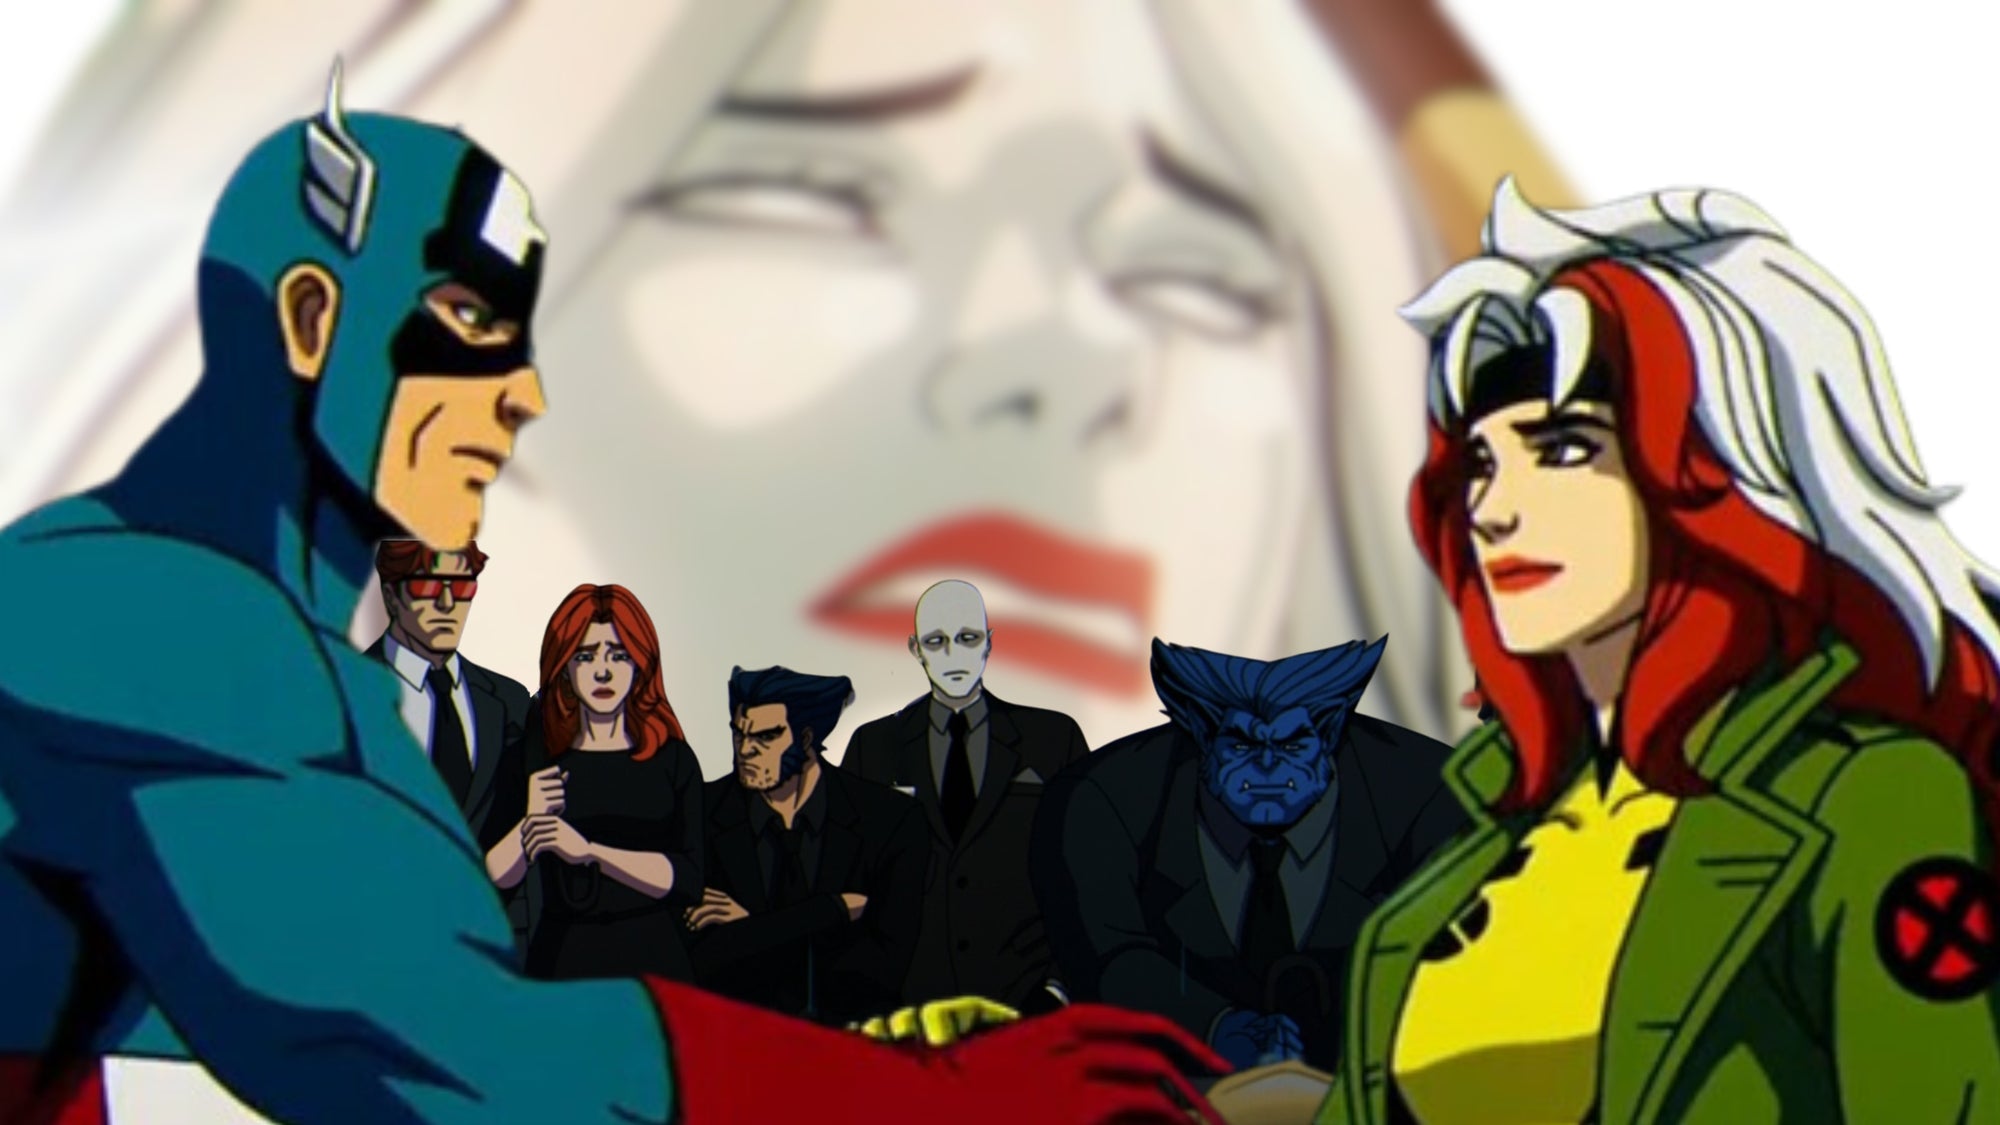 X-Men '97 Episode 7 Breakdown: Gambit's Funeral, OZT, Emma Frost, Captain America and much more